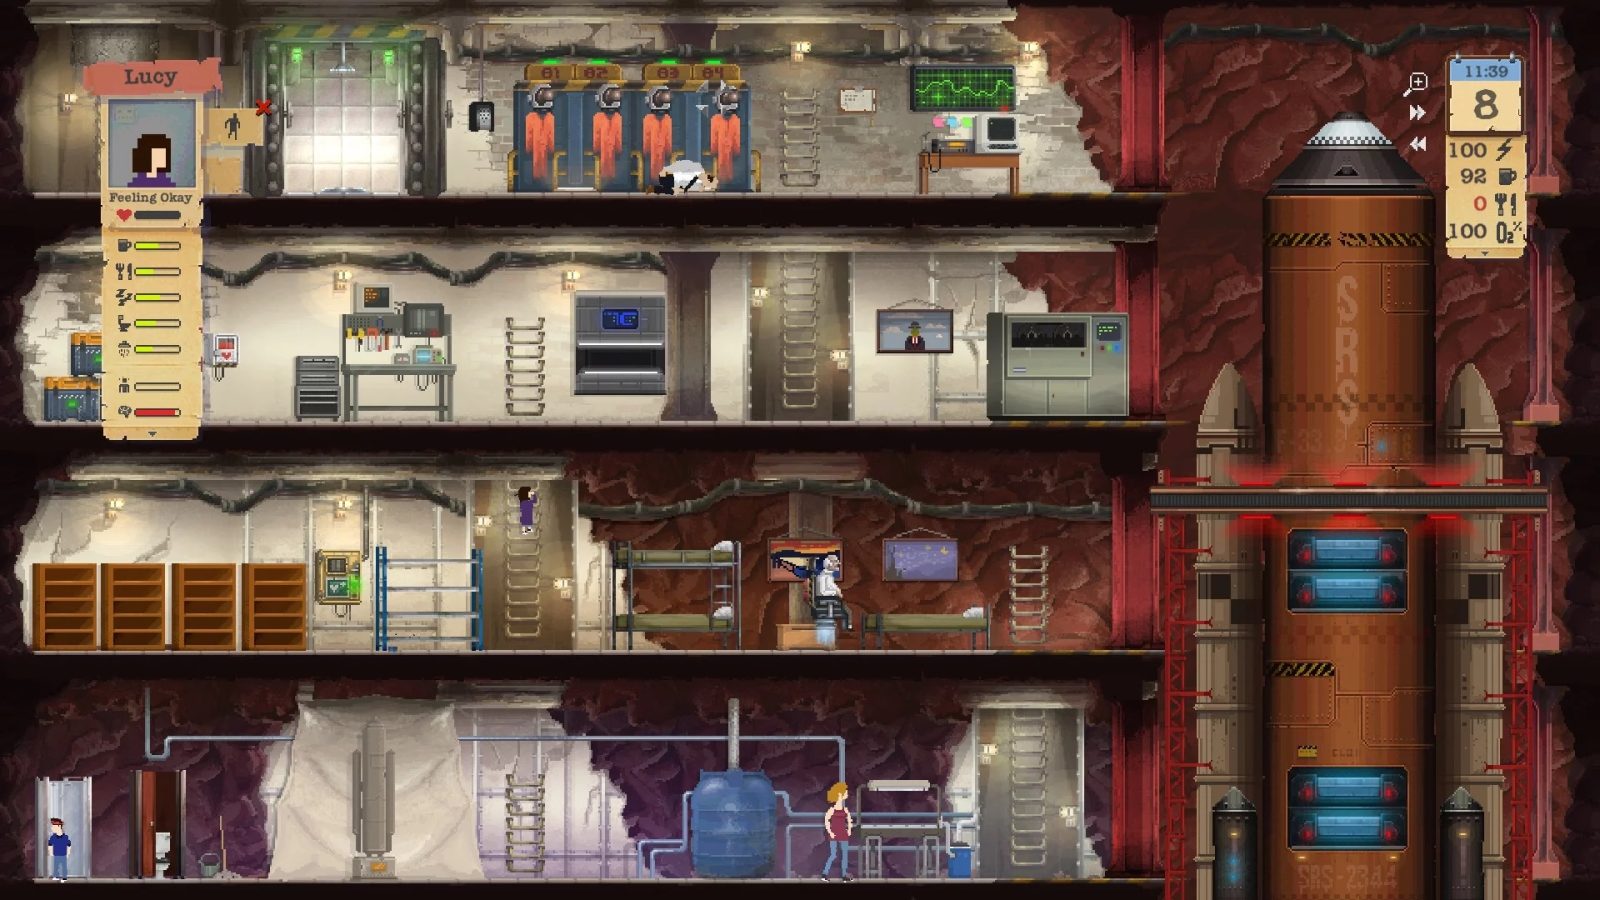 Android game and app deals: Sheltered, The Escapists 2, Worms W.M.D, and more